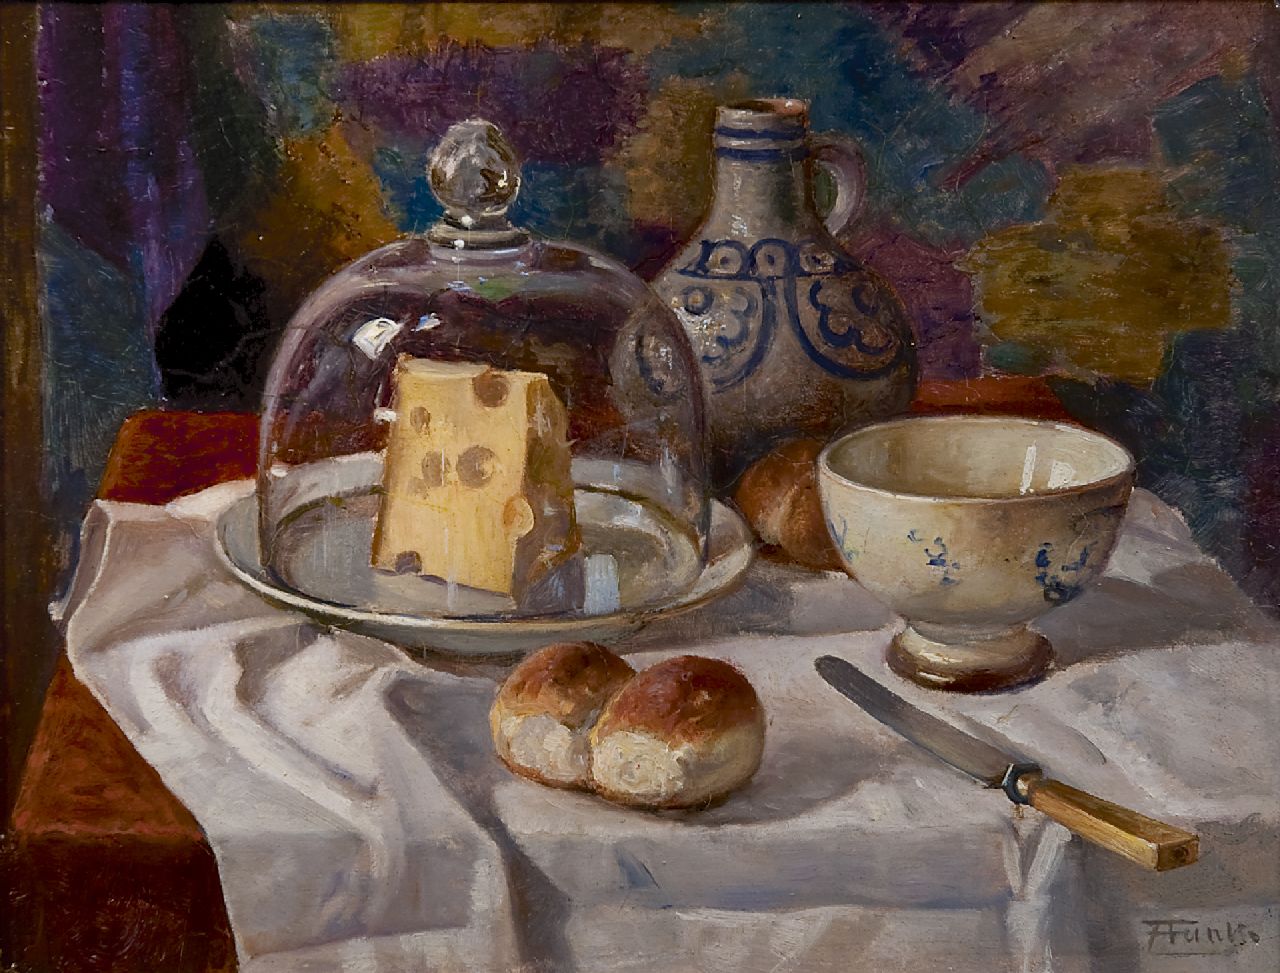 Anton Funke | A still life with a cheese cover, a bowl and rolls, Öl auf Papier auf Holz, 18,6 x 24,3 cm, signed l.r.